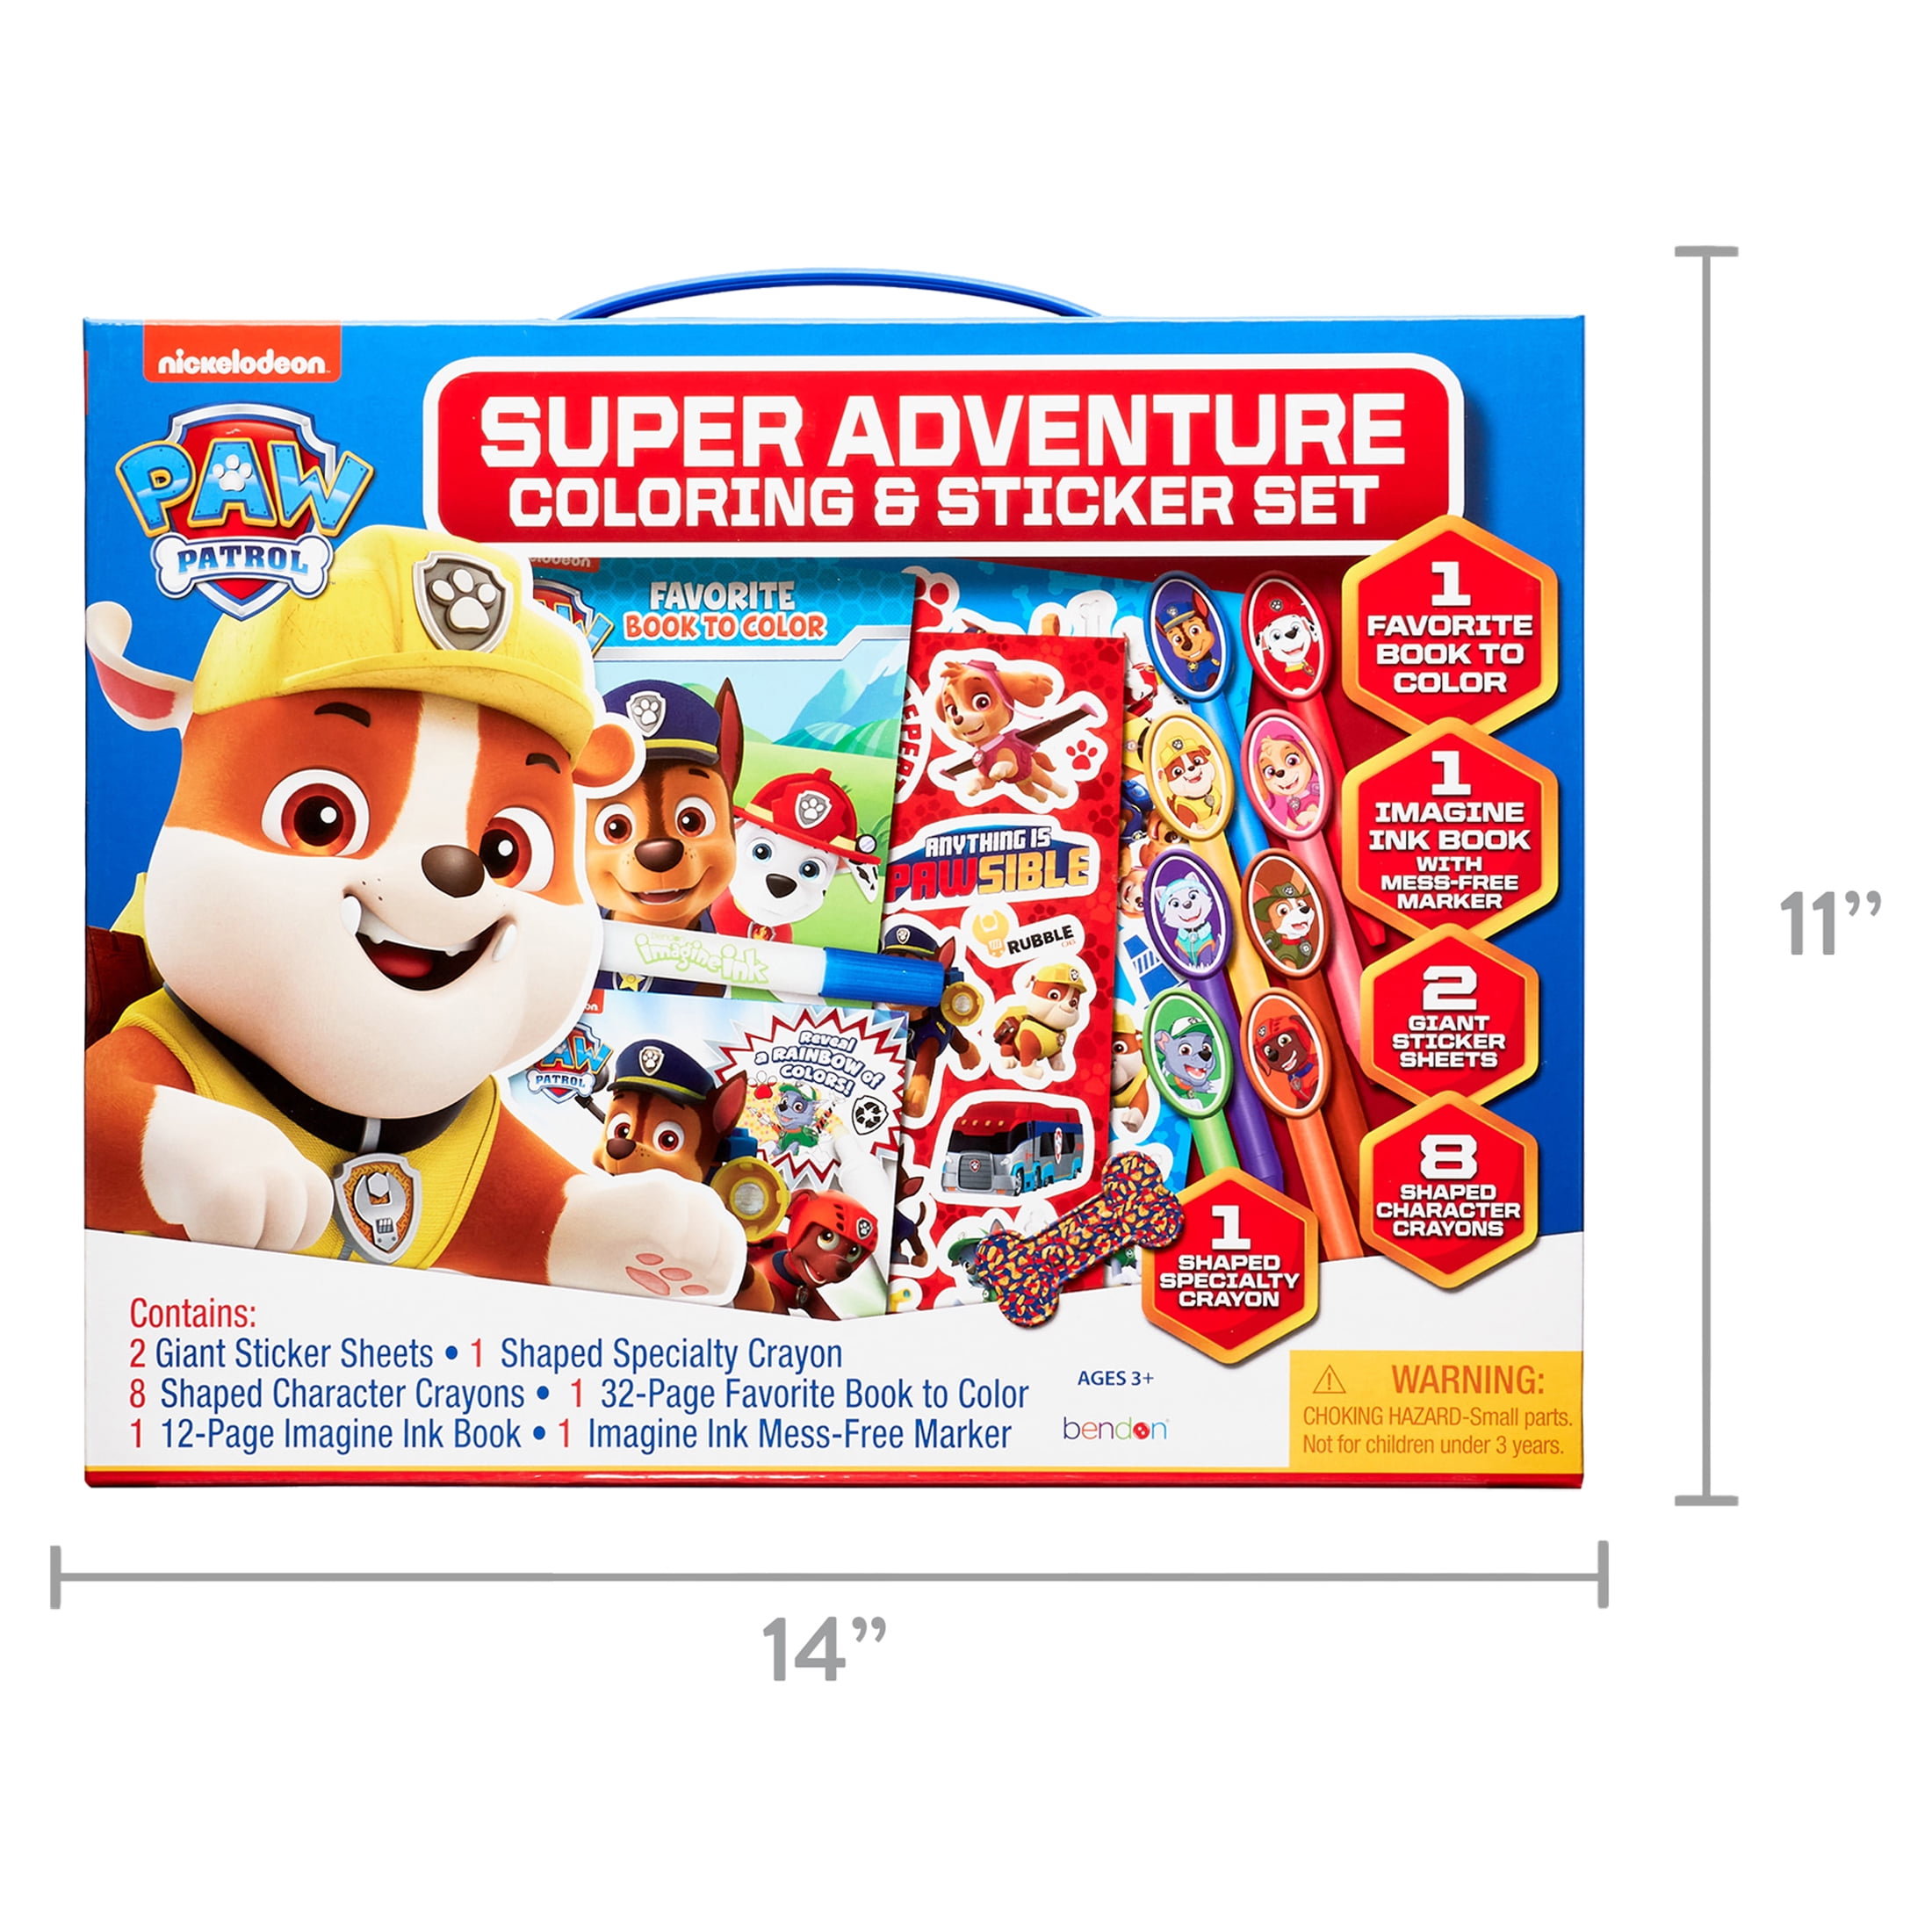 PAW Patrol Boys Activity Set 6pc Kids Arts and Crafts Kit for Home, Travel,  or Gift